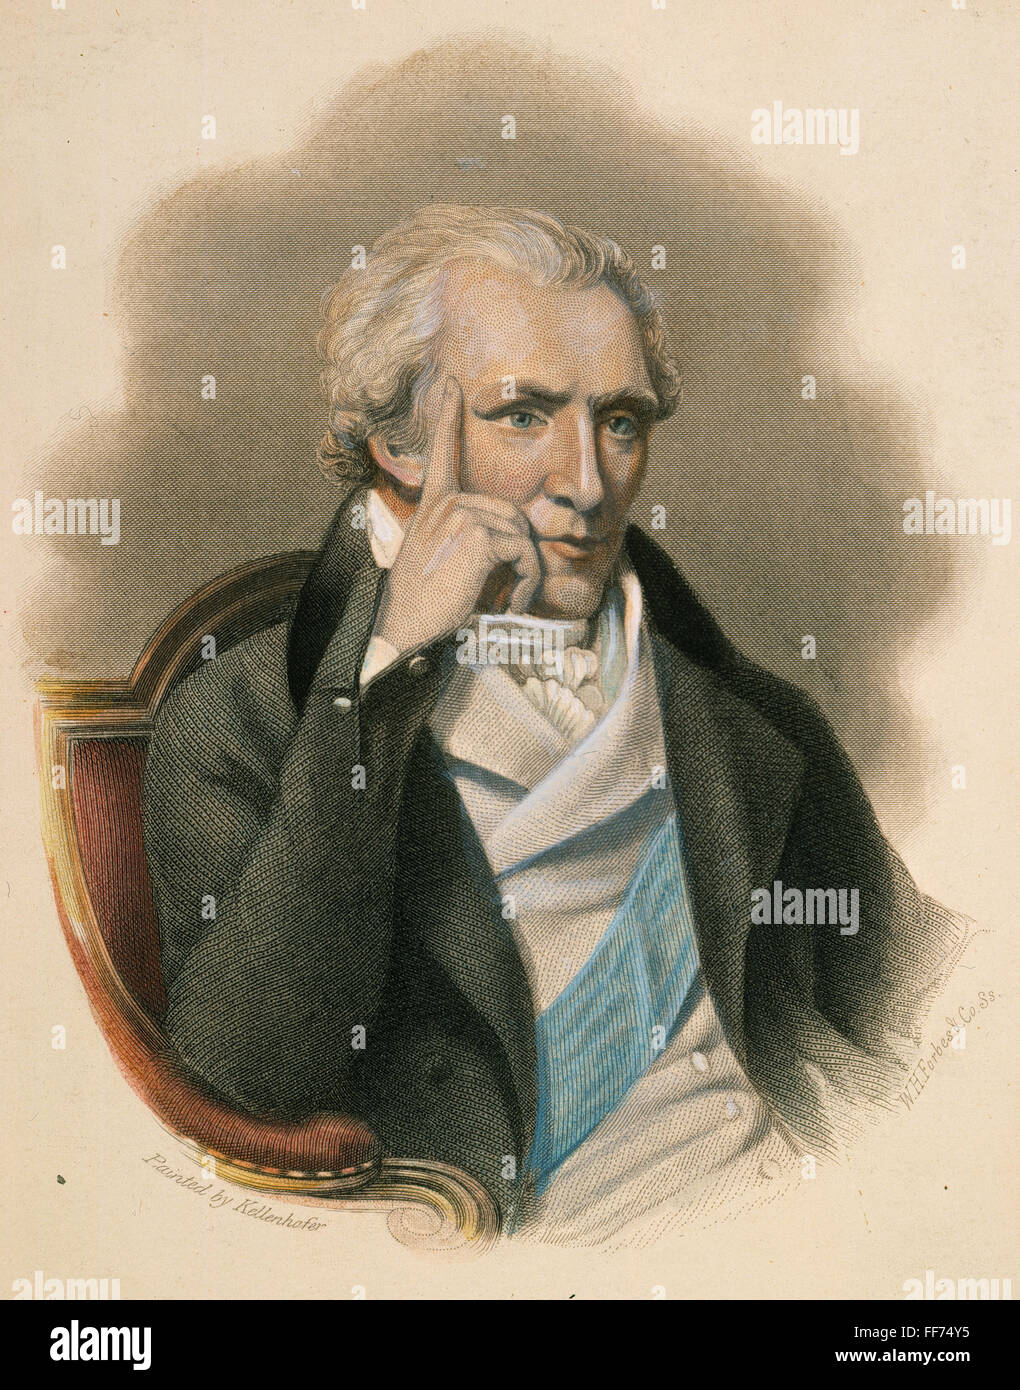 BENJAMIN THOMPSON /n(1753-1814). Count Rumford. American phycicist and inventor. At age 45. Line and stipple engraving, 19th century. Stock Photo